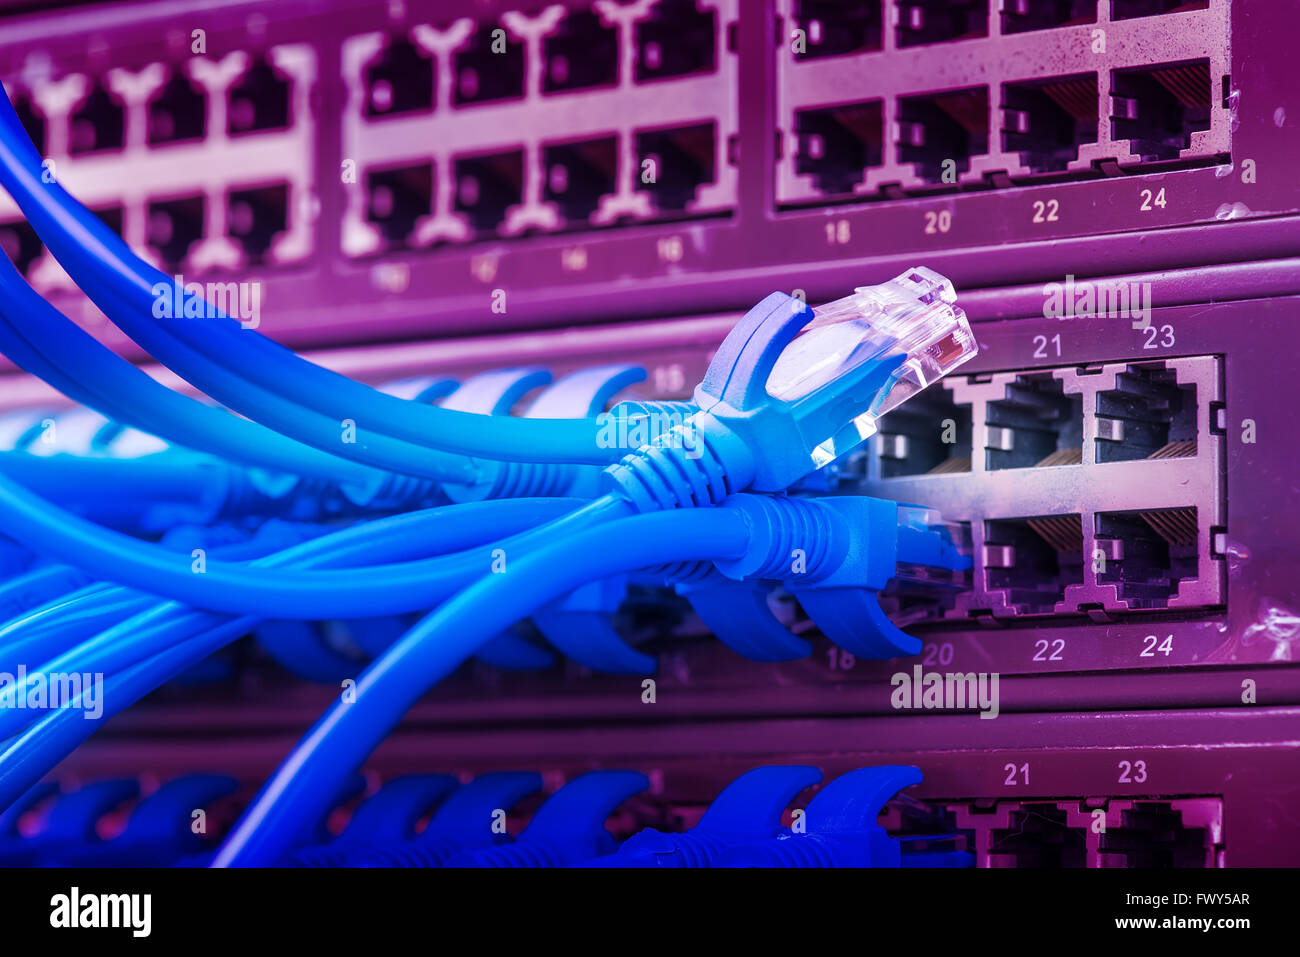 Information Technology Computer Network, Telecommunication Ethernet Cables Connected to Internet Switch. Stock Photo